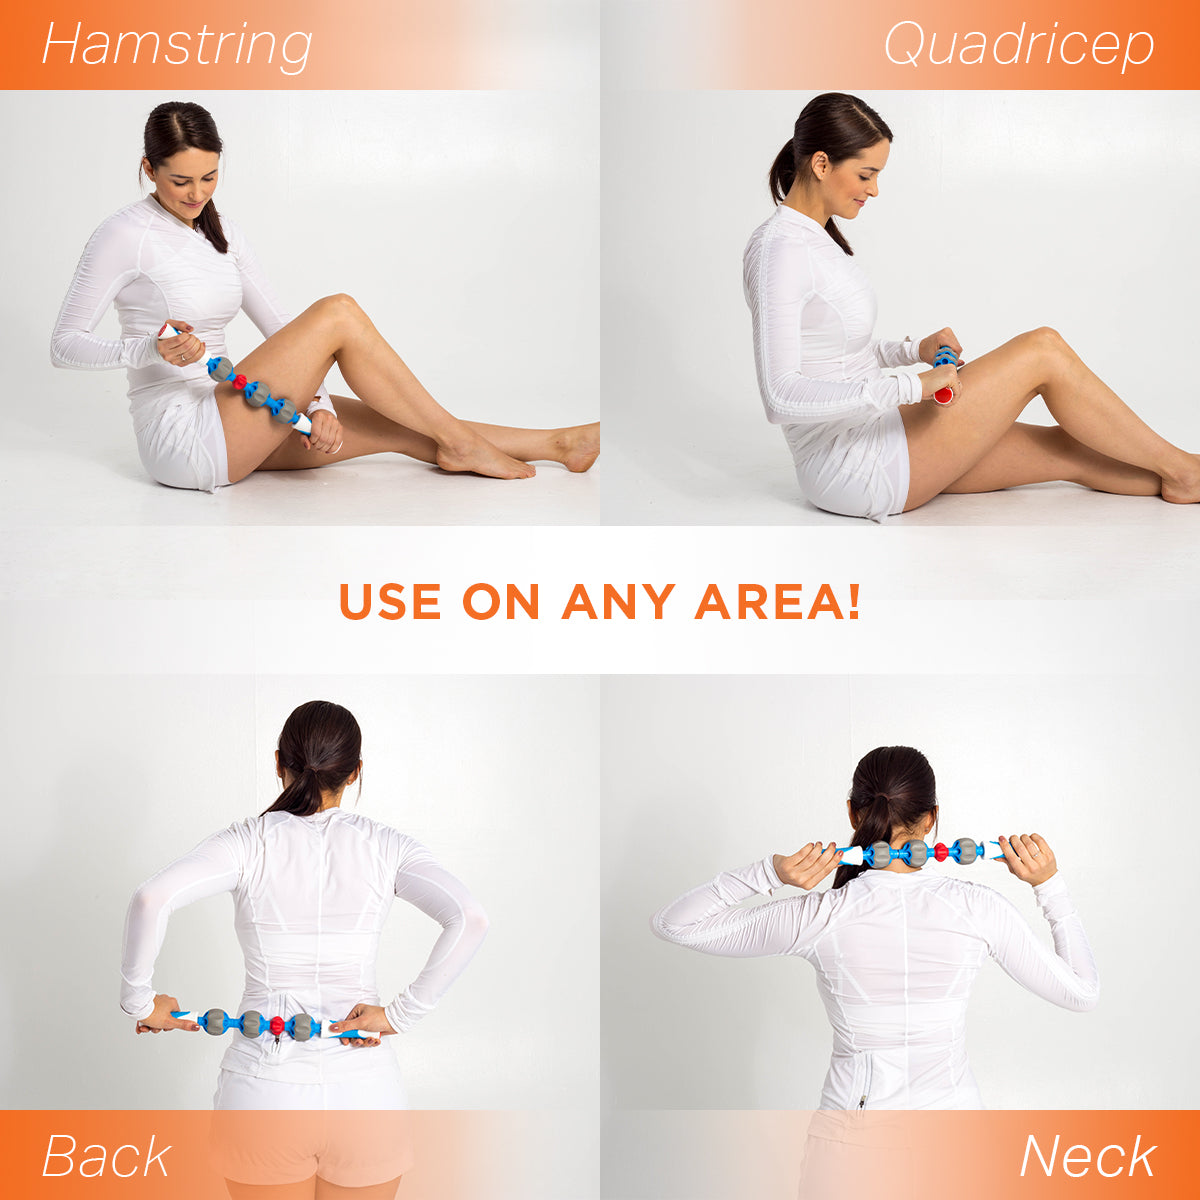 Massaging leg on hamstring, quadricep, back, and neck with the ProStretch Type C Stick Massage Roller